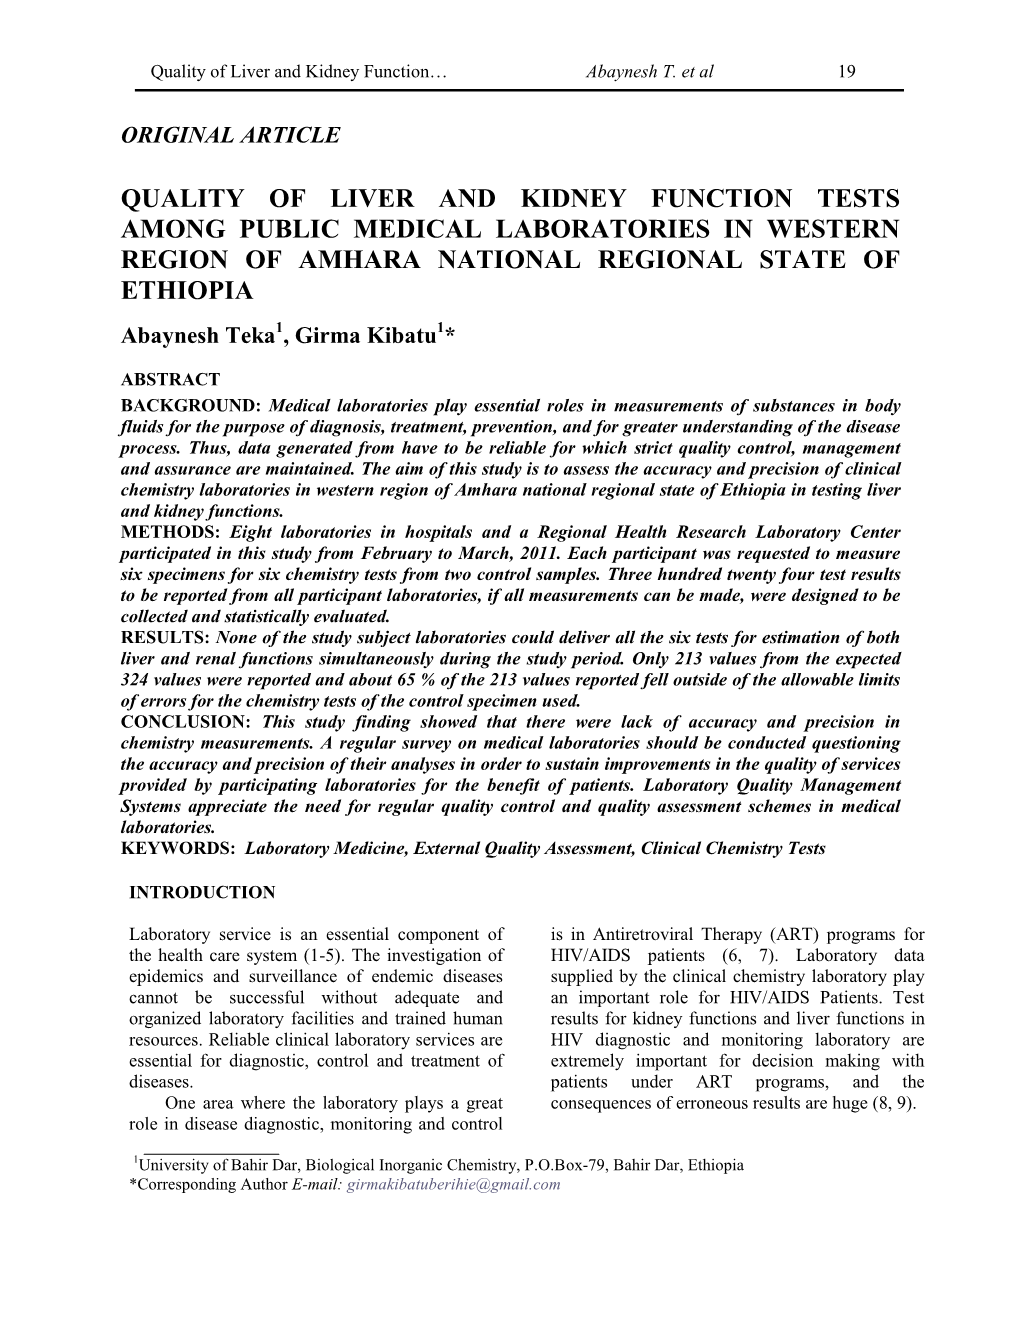 Quality of Liver and Kideny Function Test